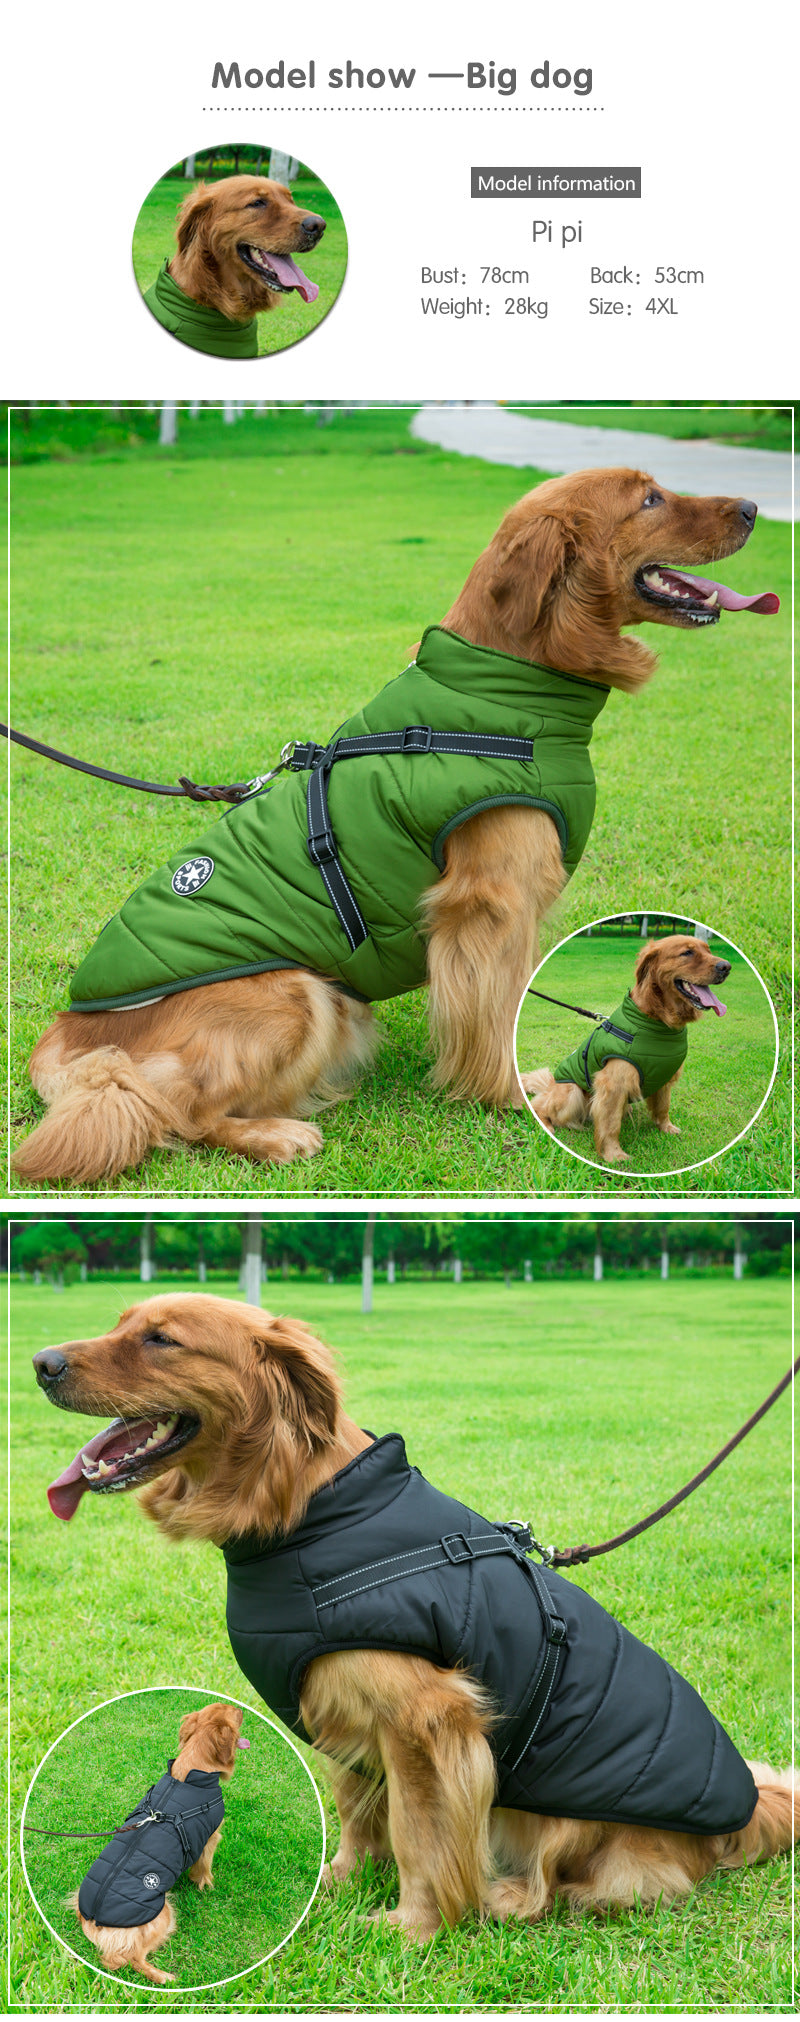 Dog Warm Clothes Jacket for pet